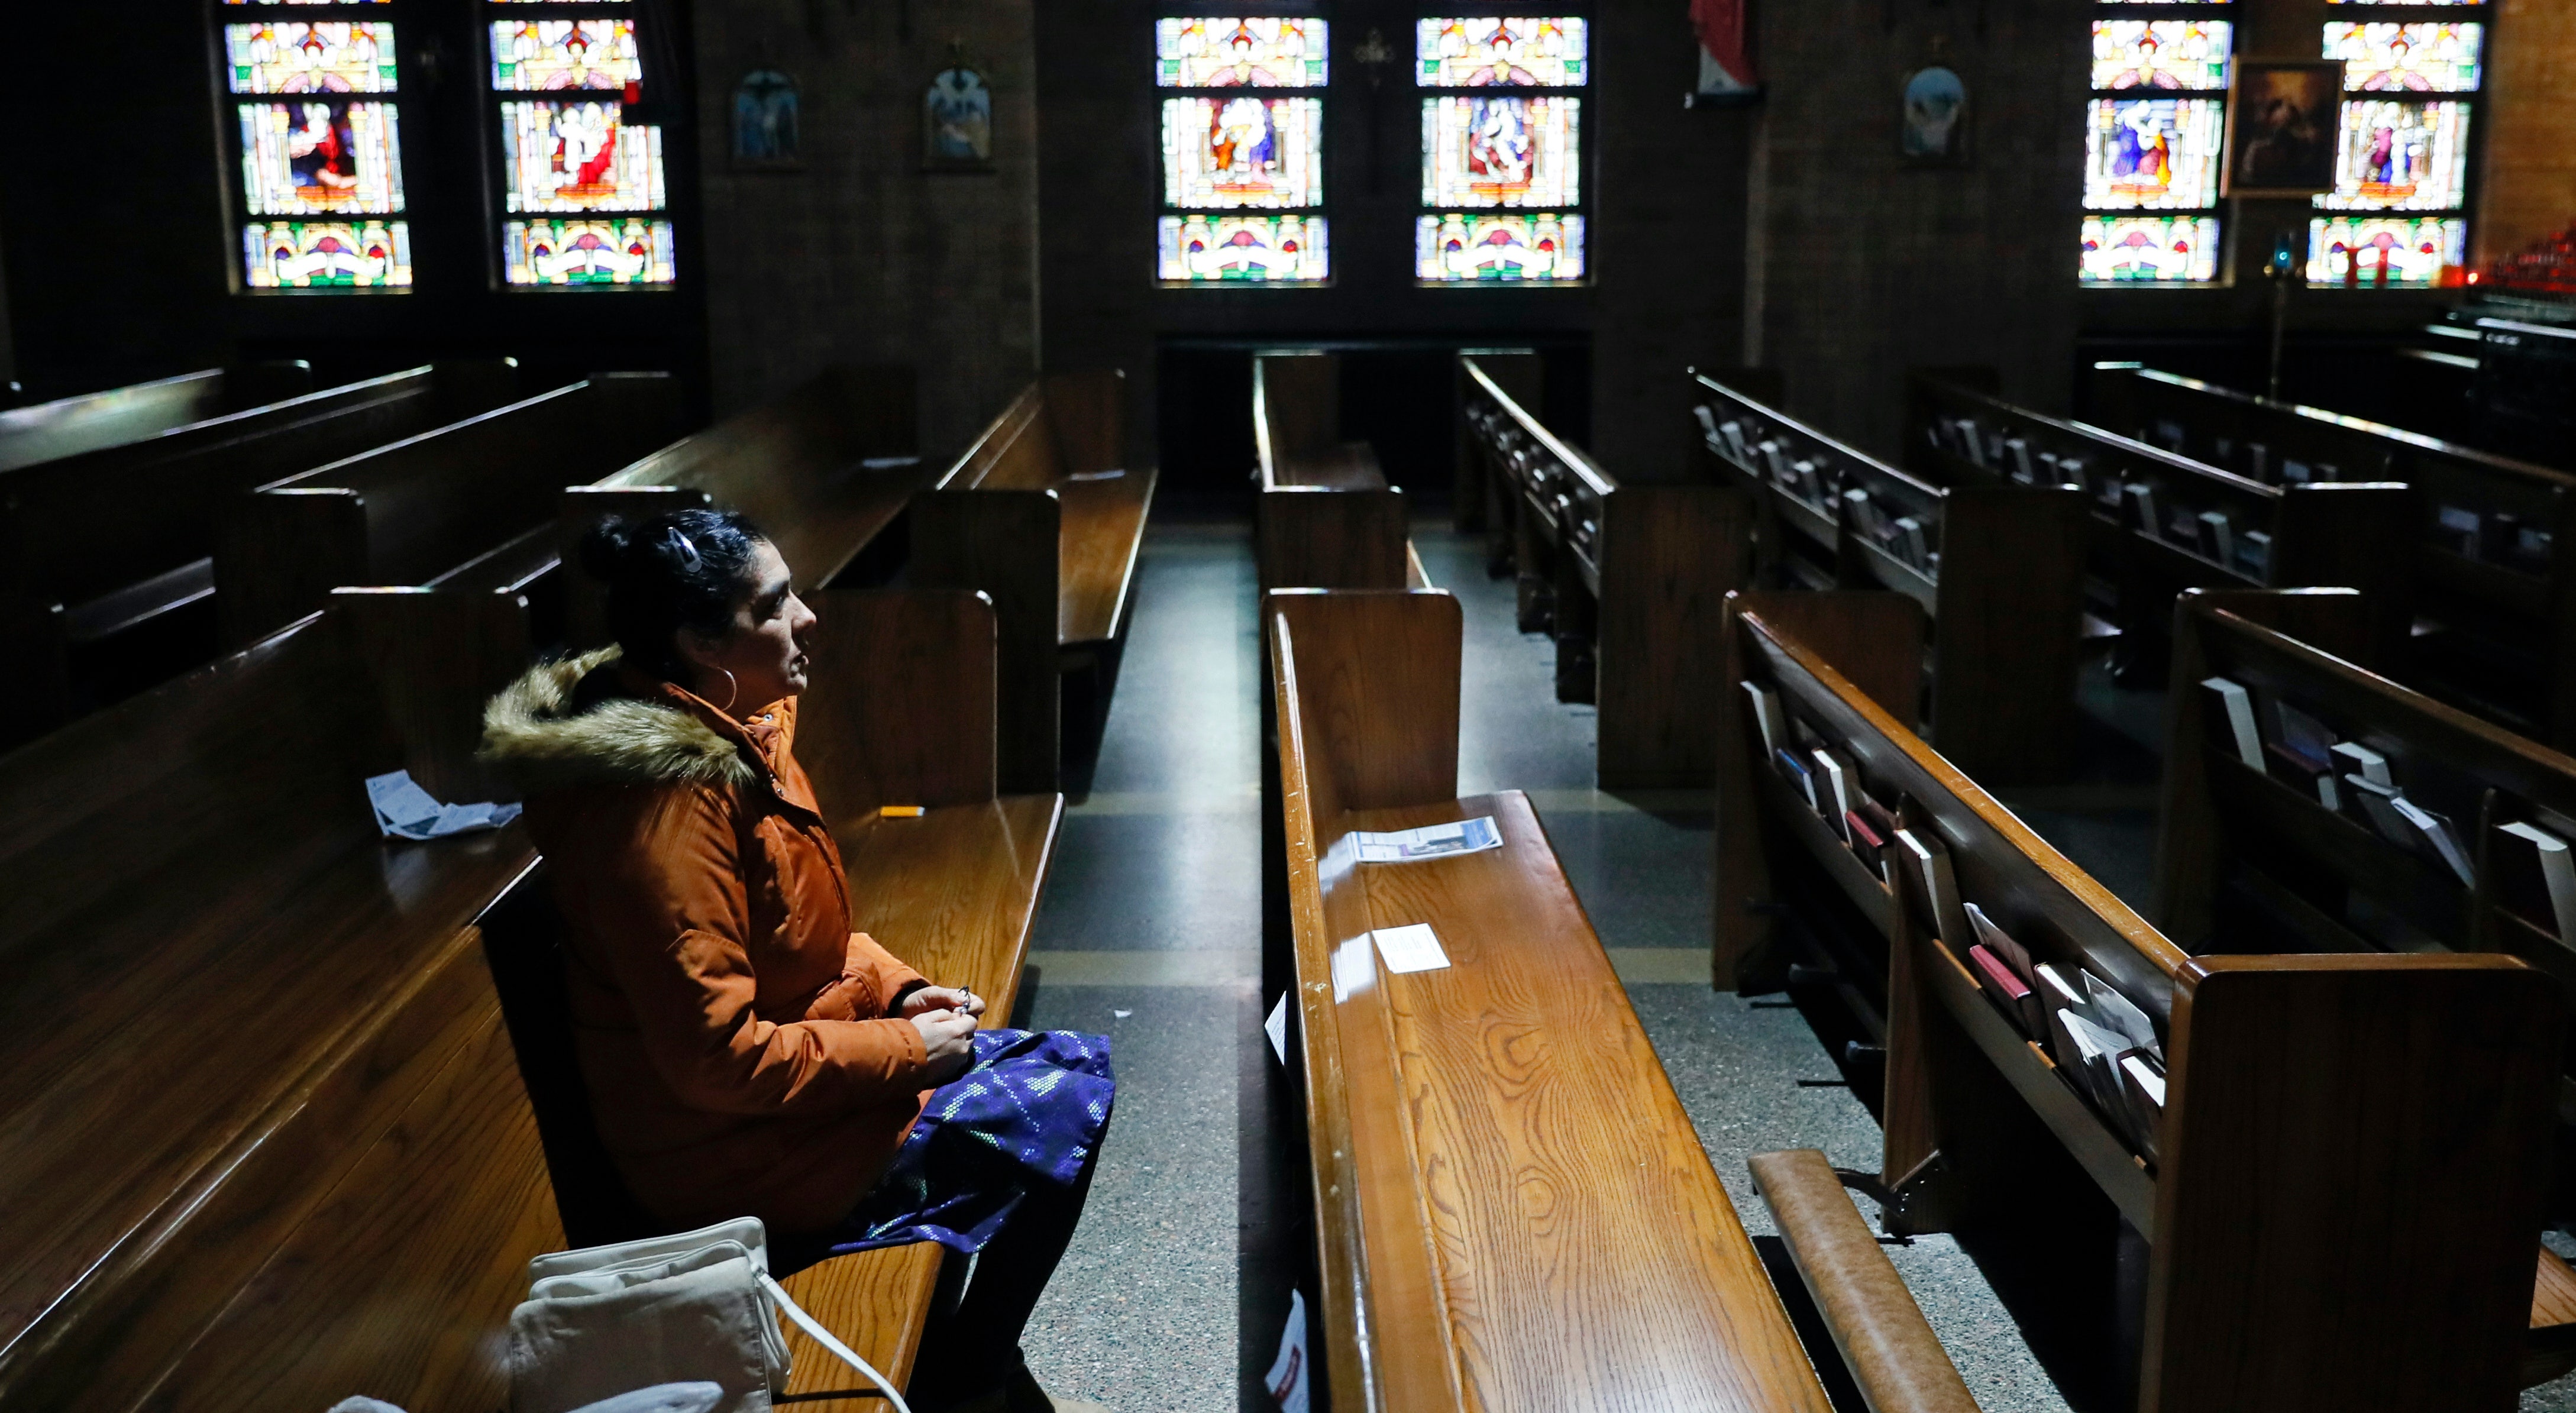 I went back to church on Sunday. Here's why we should all consider getting back to religion